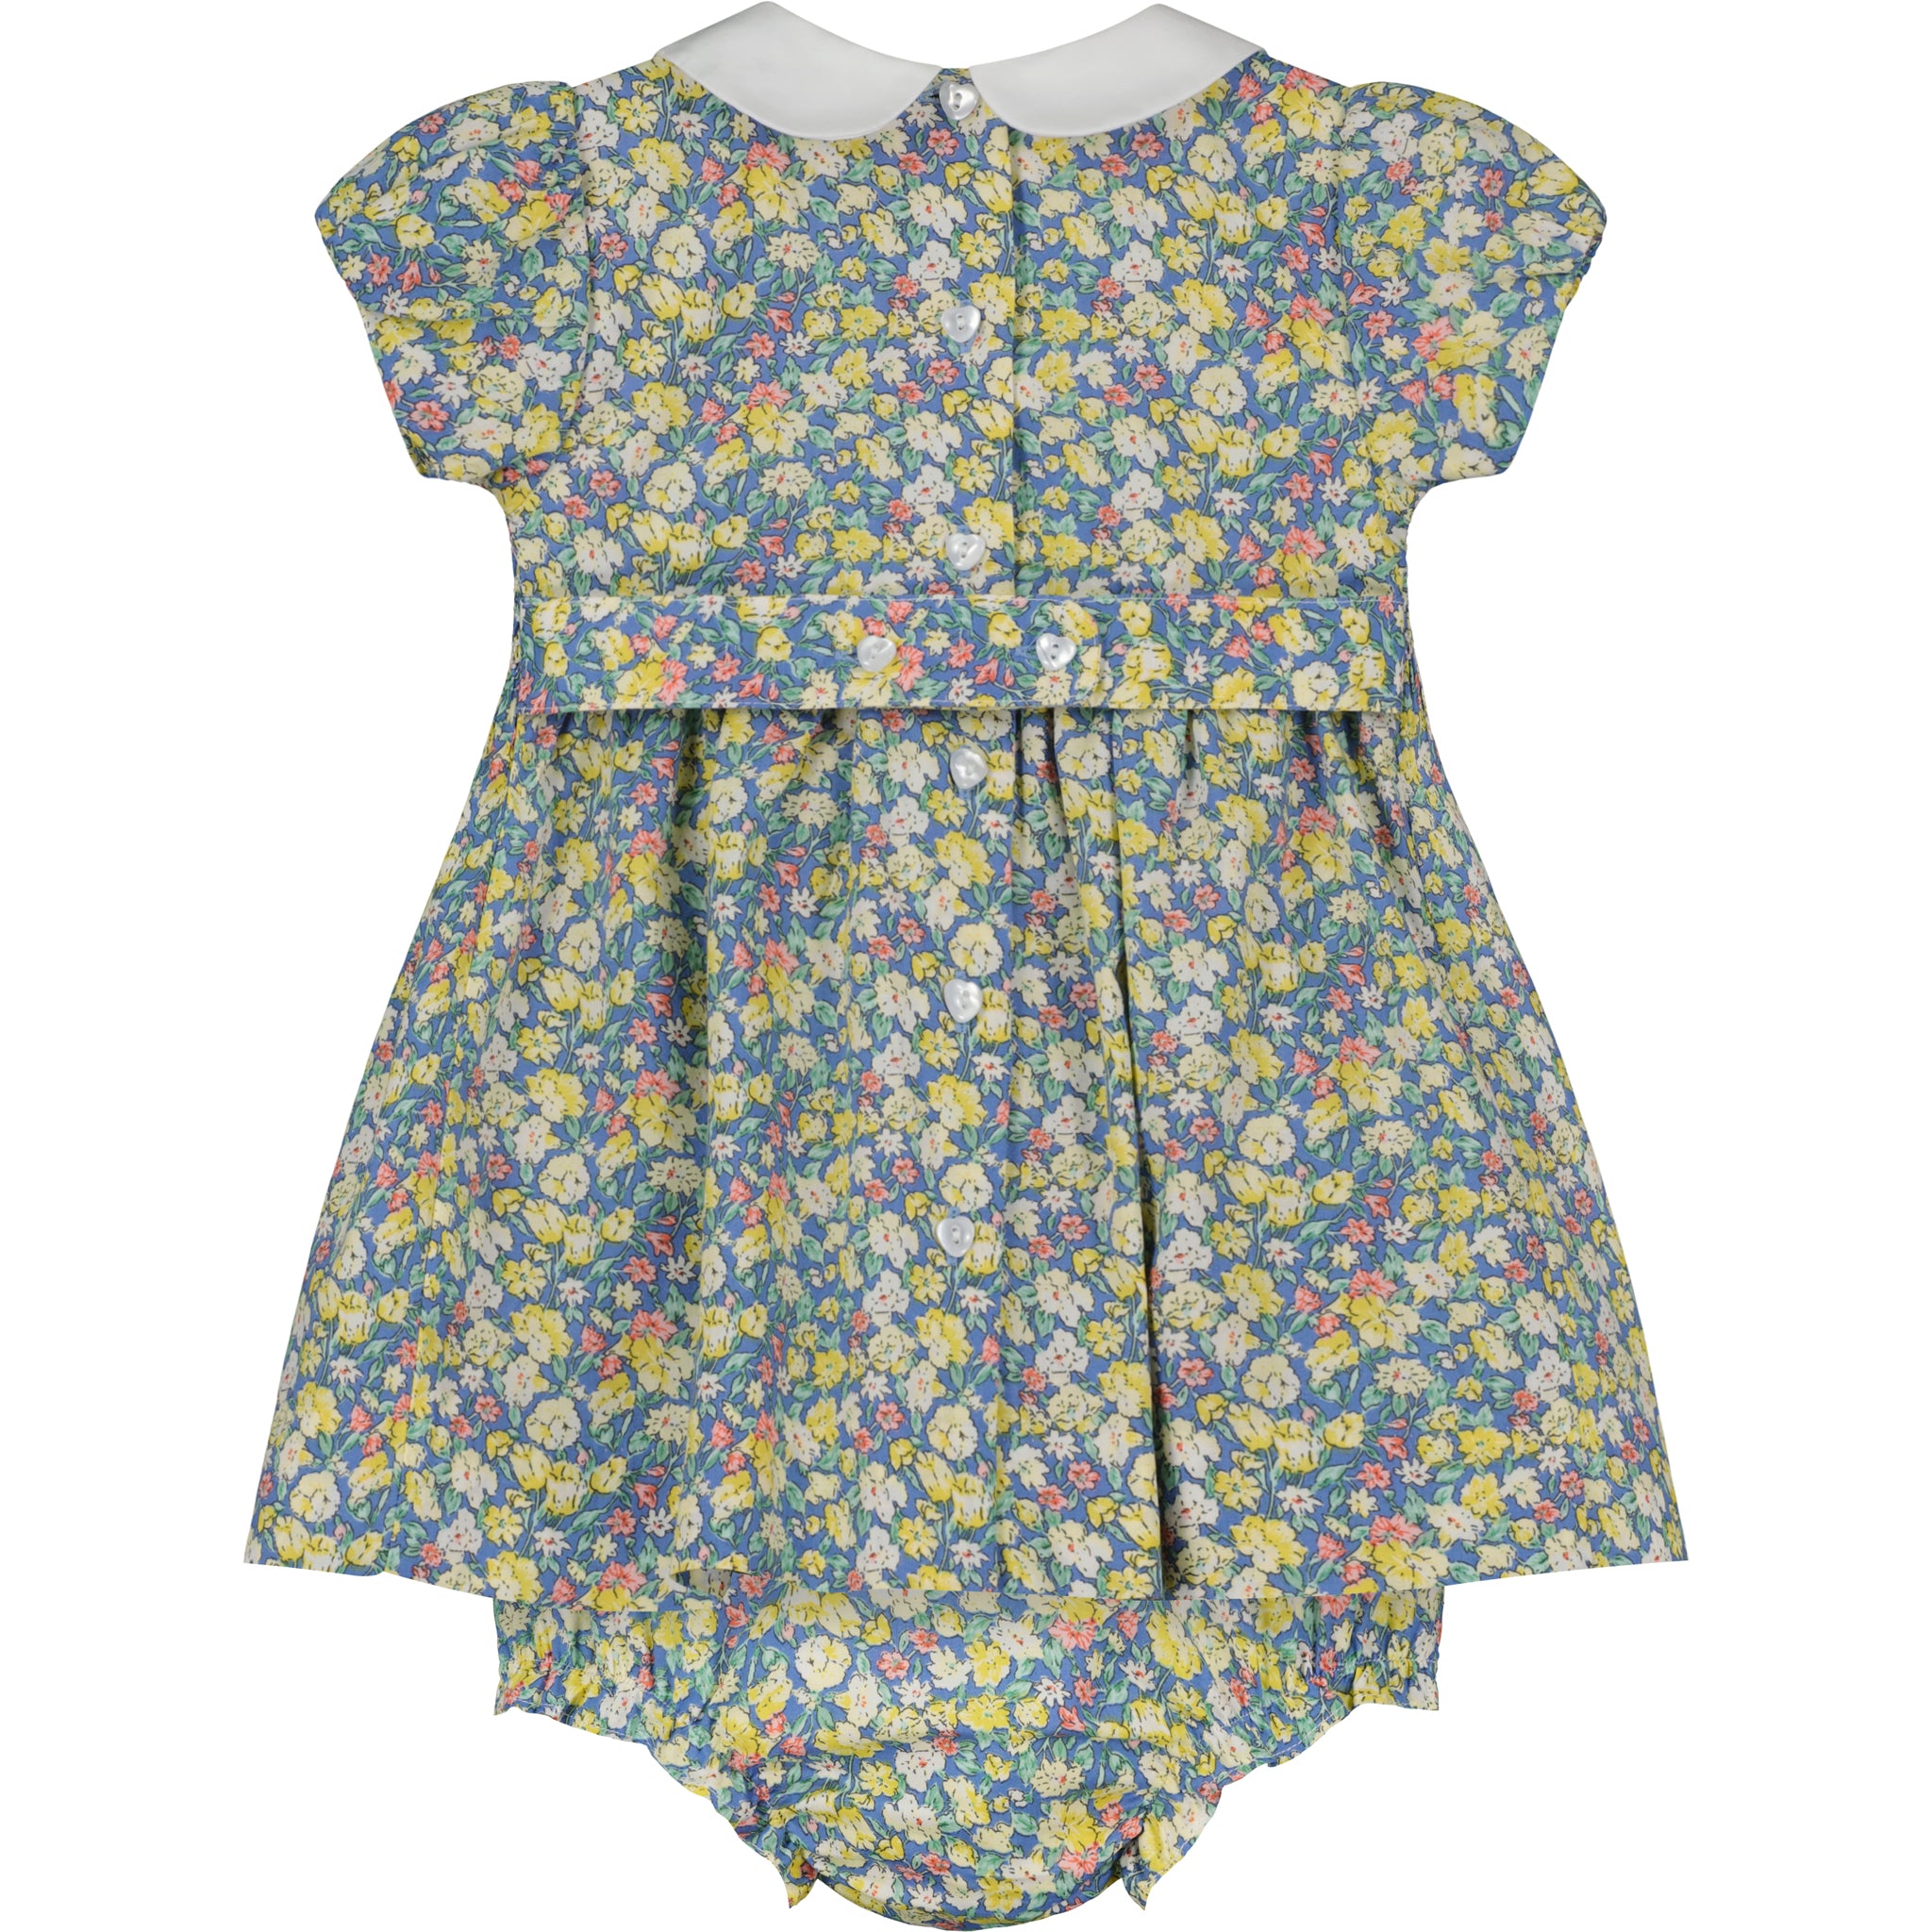  hand-smocked floral dress with white Peter Pan collar, back